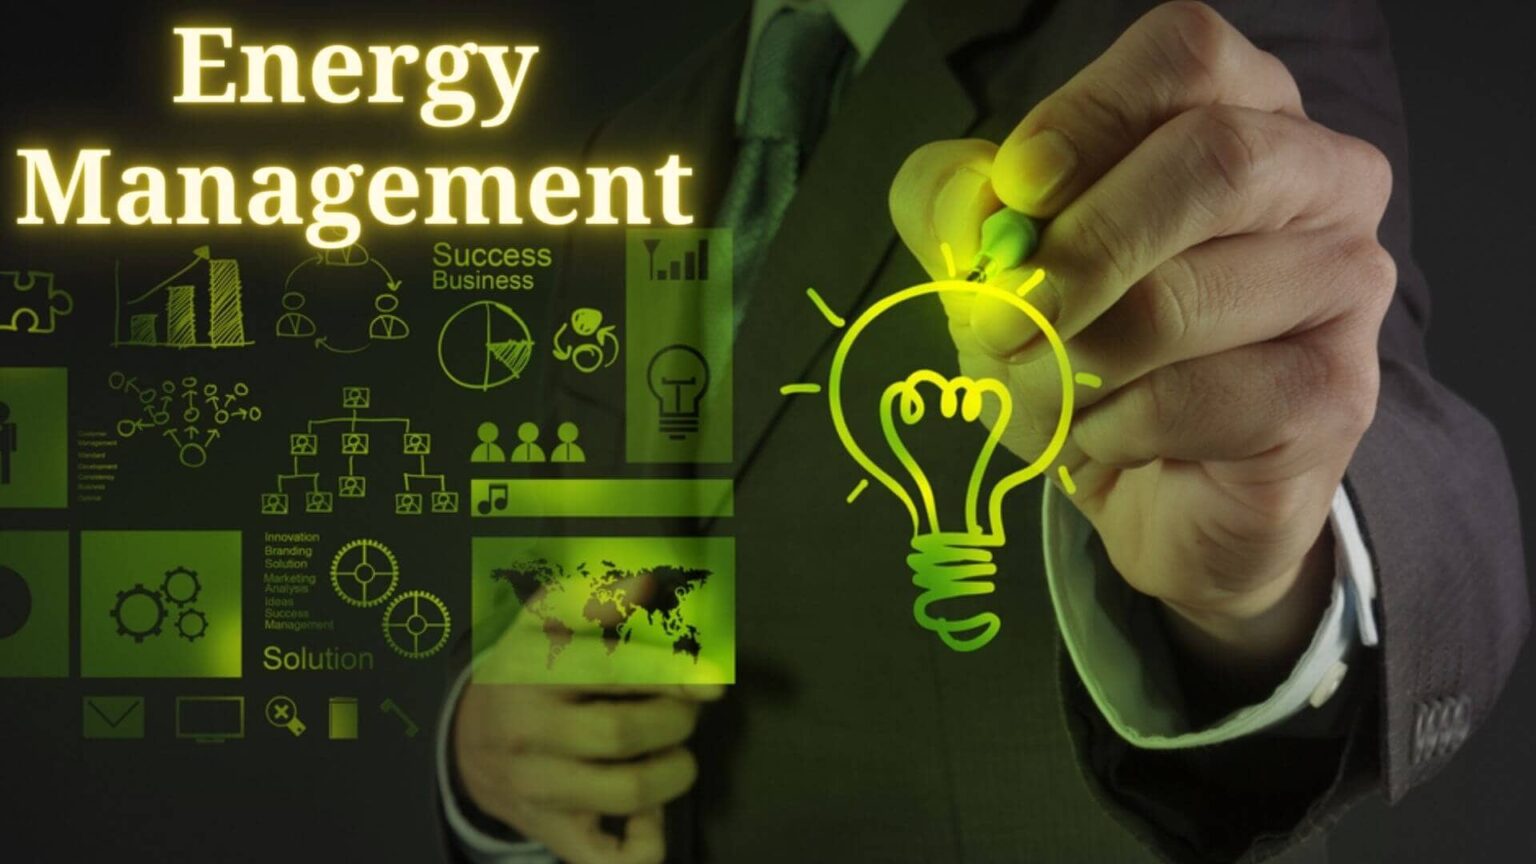 ISO 50001 Energy Management System | Inzinc Consulting